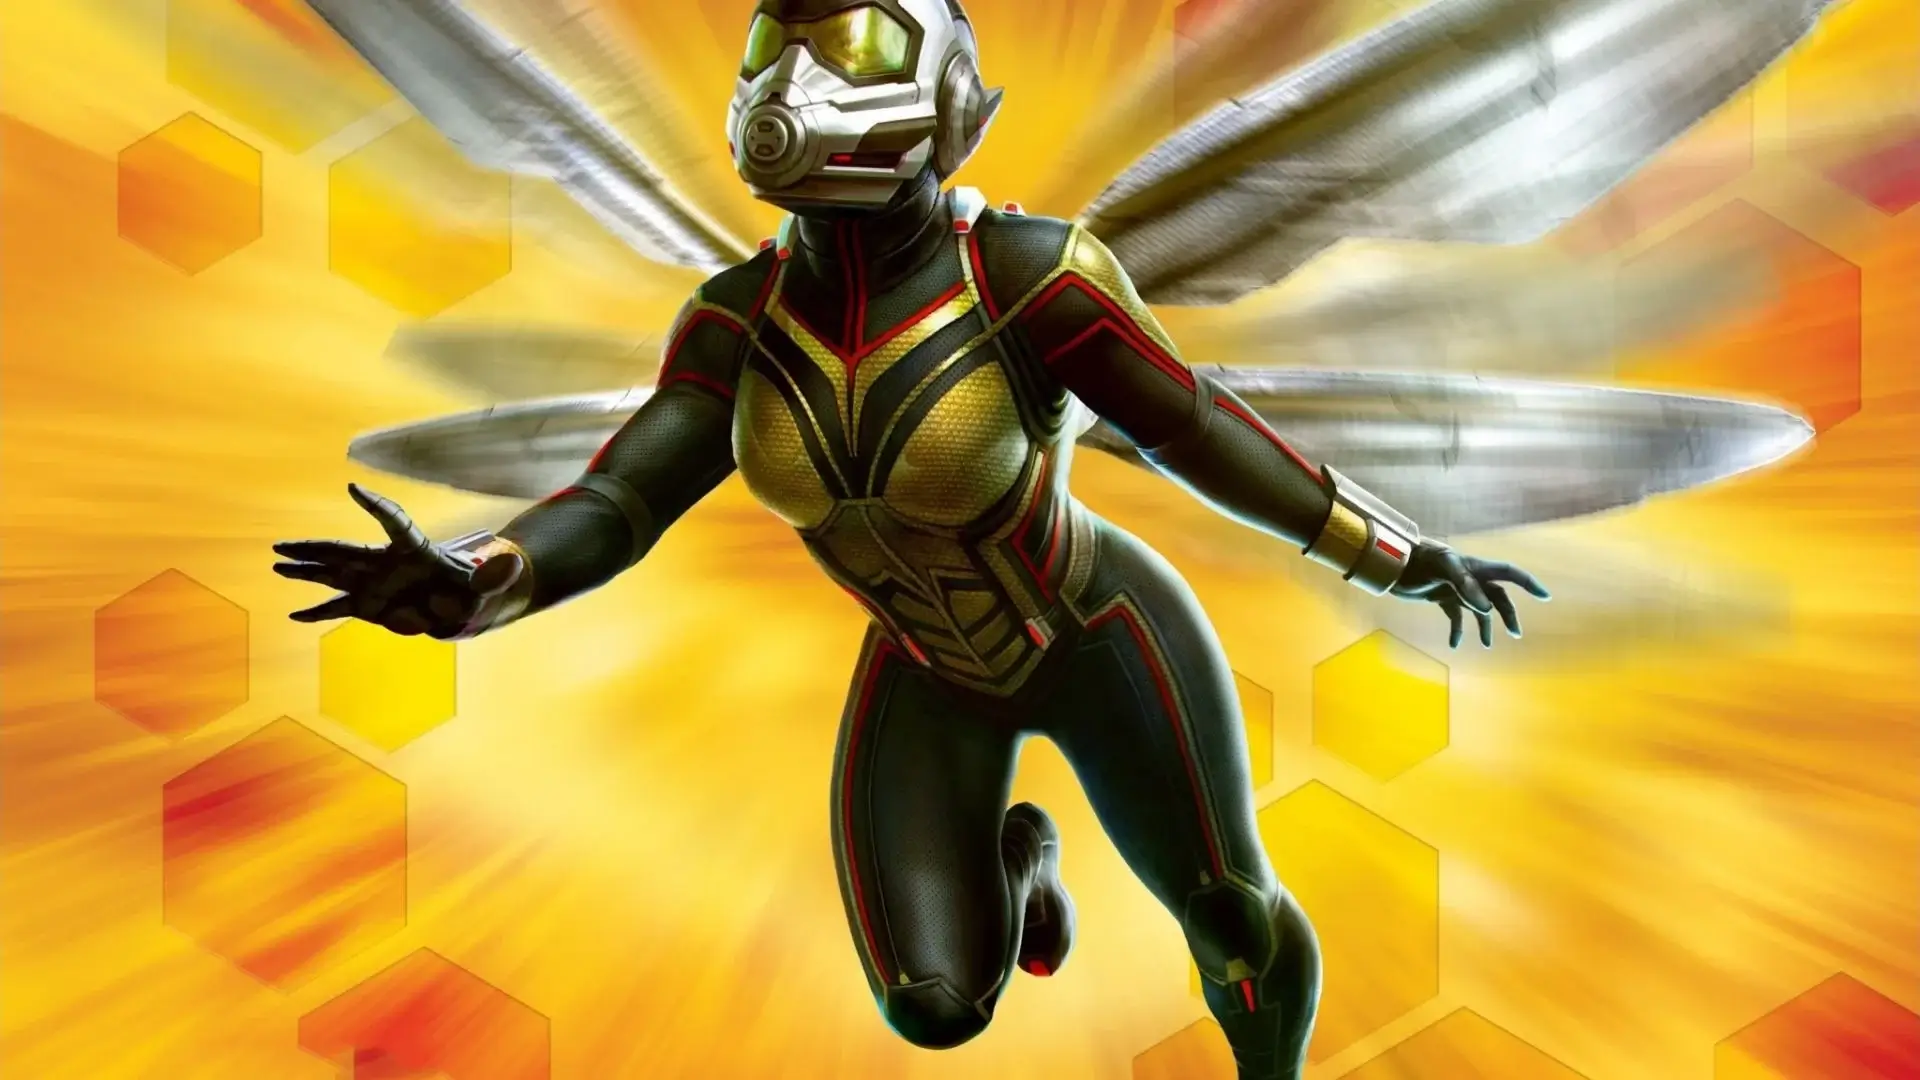 The Wasp from Marvel Comics.